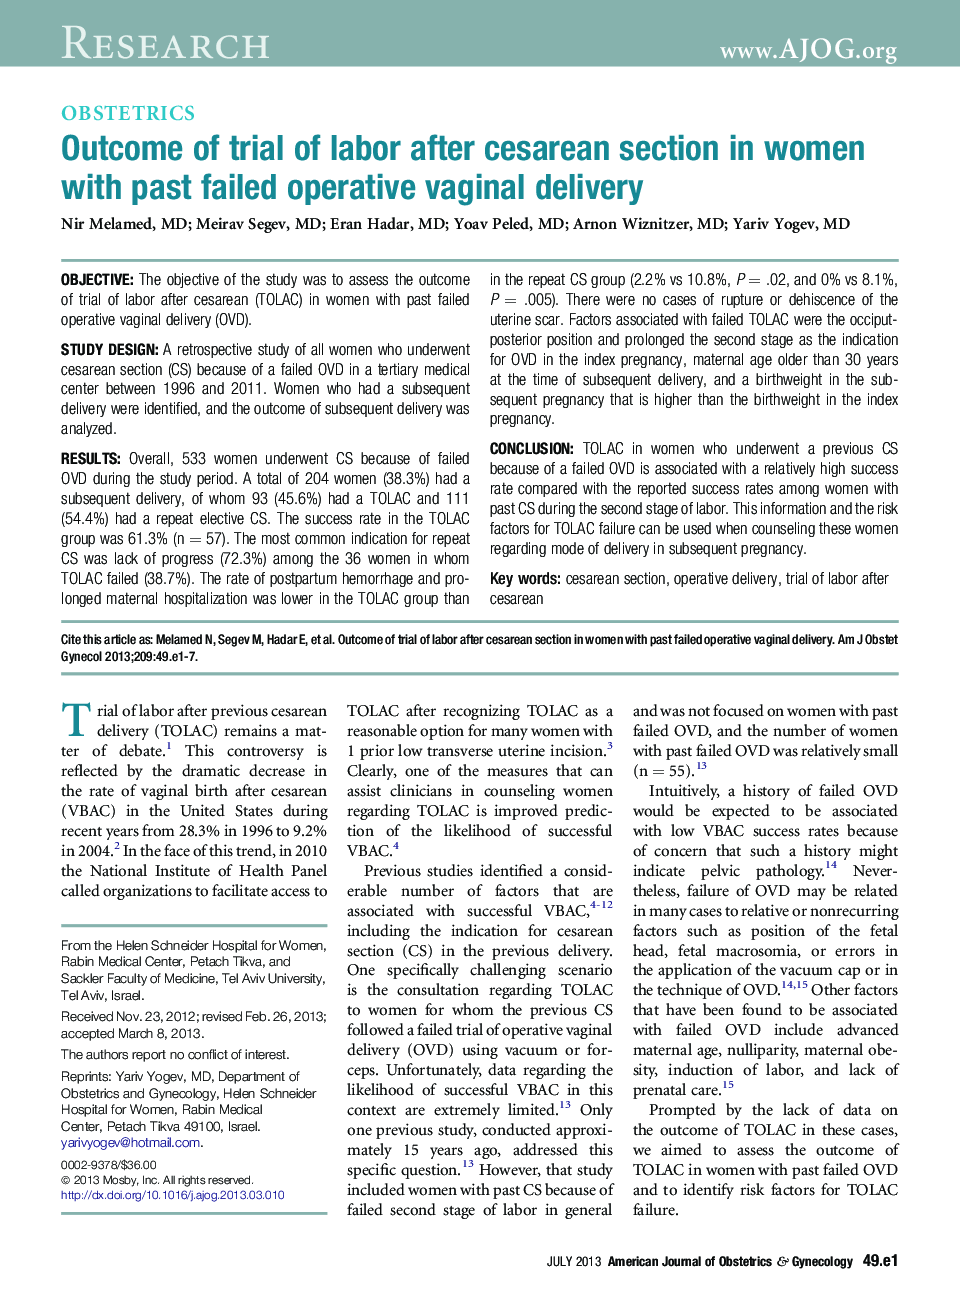 Outcome of trial of labor after cesarean section in women with past failed operative vaginal delivery